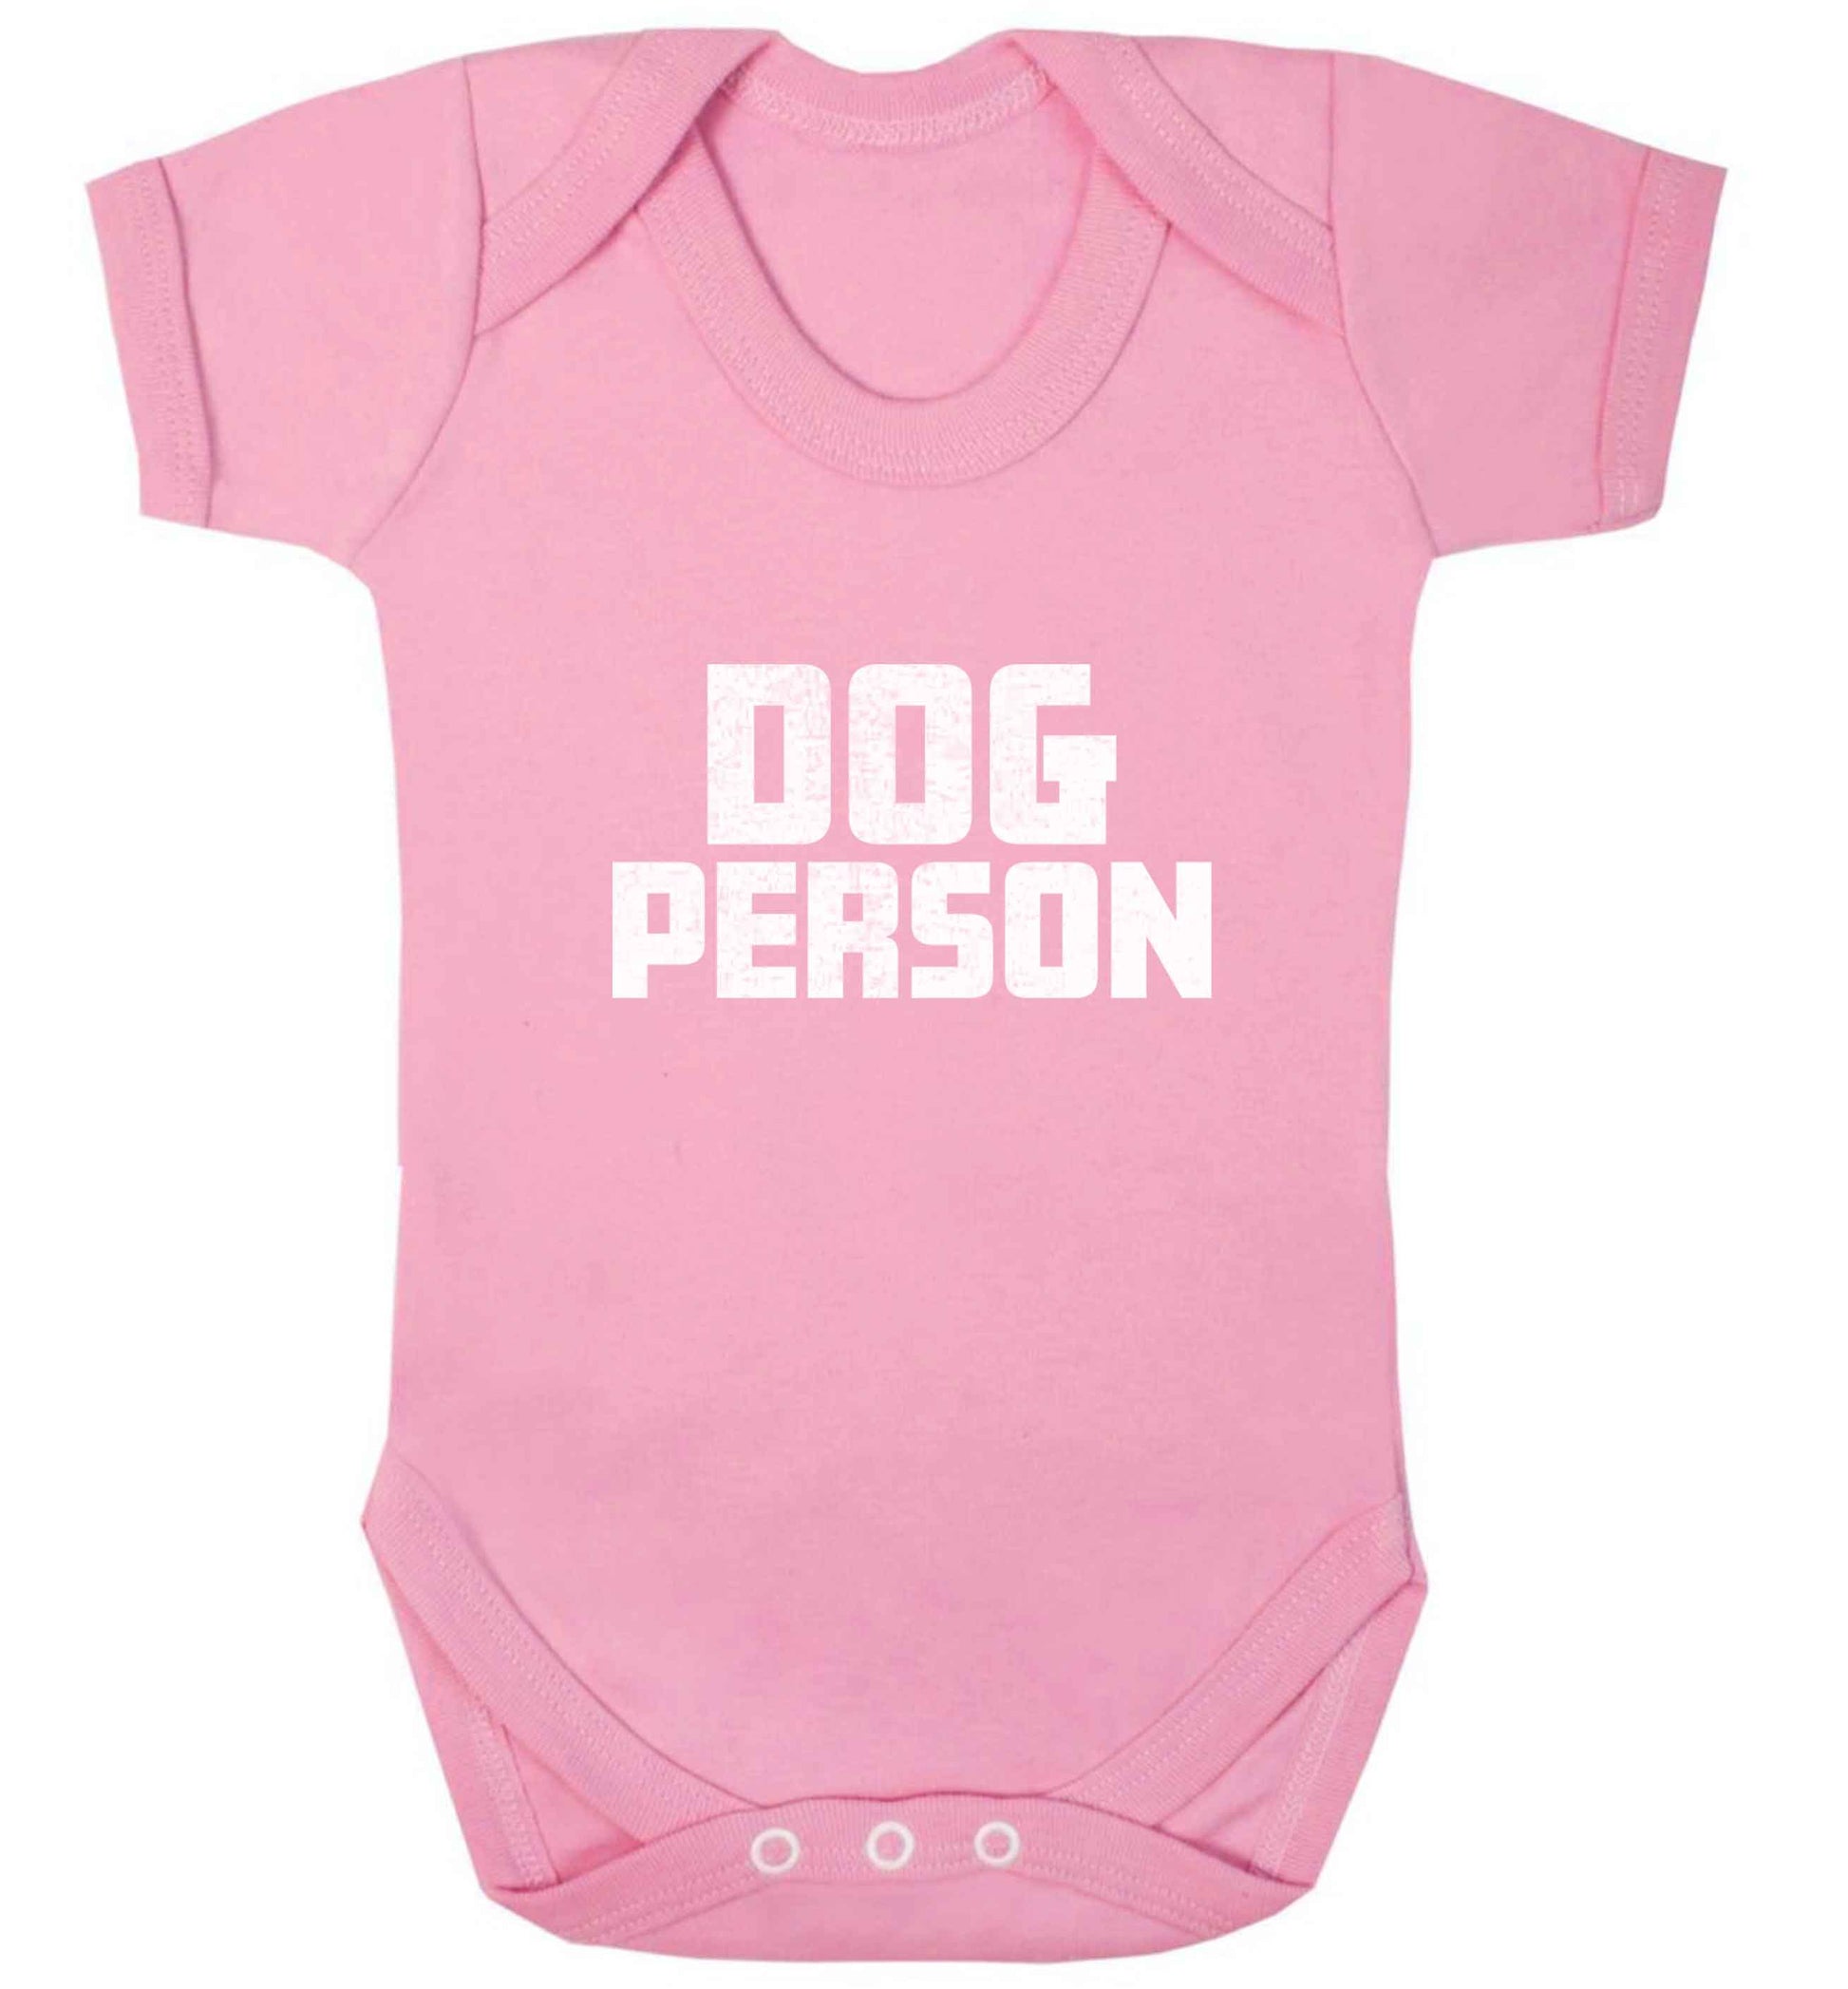 Dog Person Kit baby vest pale pink 18-24 months